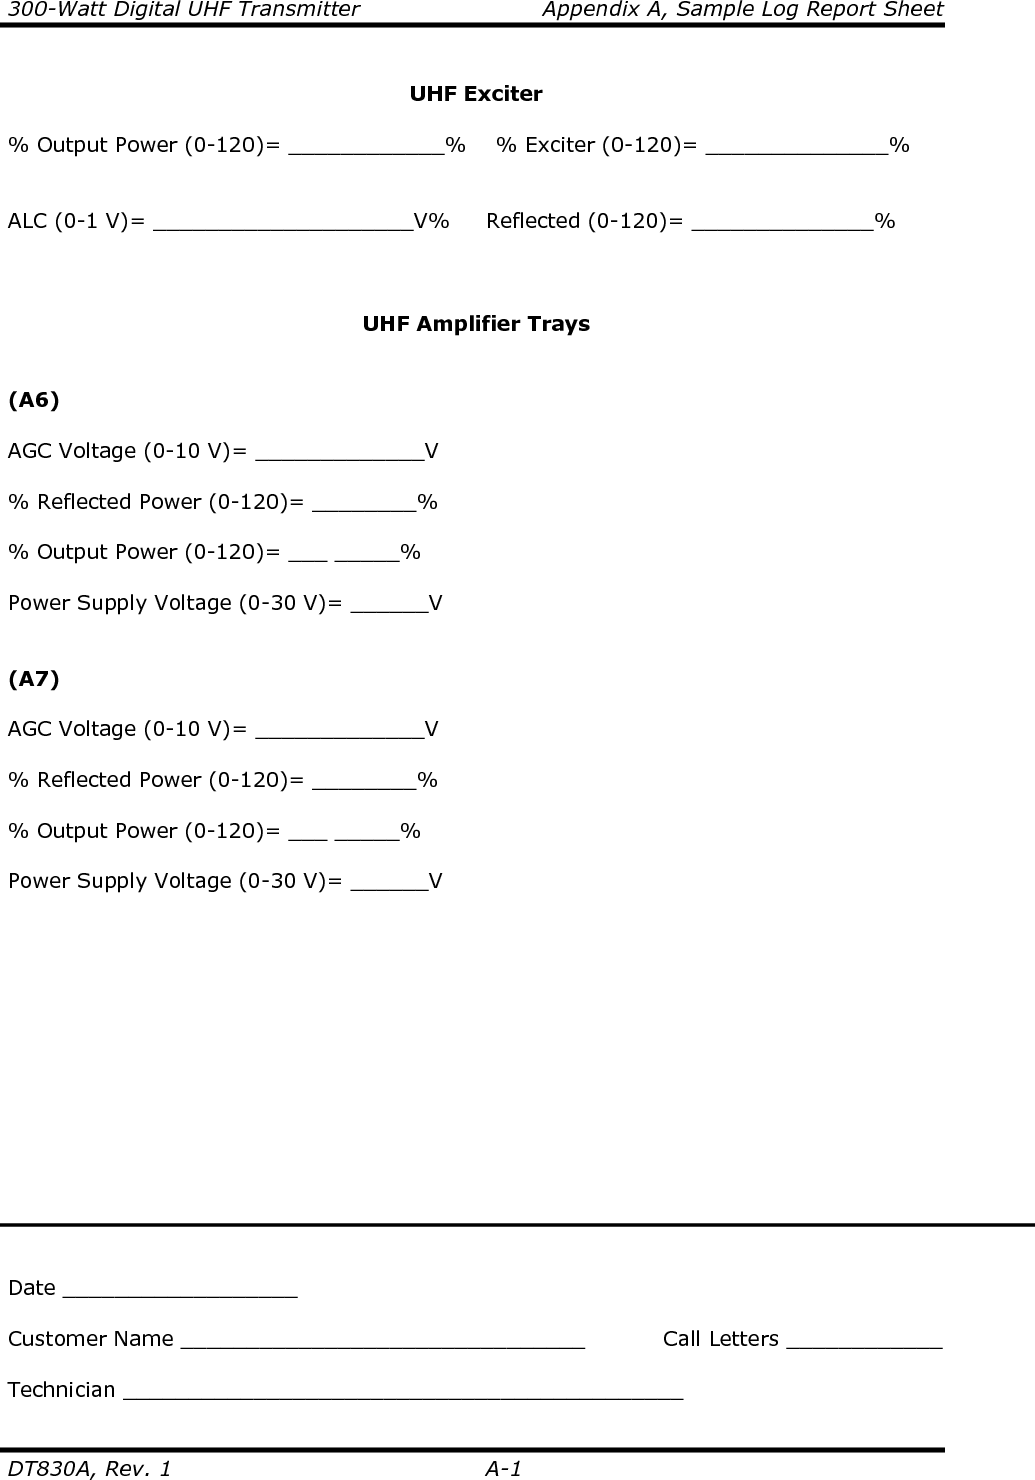                  APPENDIX B  TYPICAL OPERATIONAL READINGS